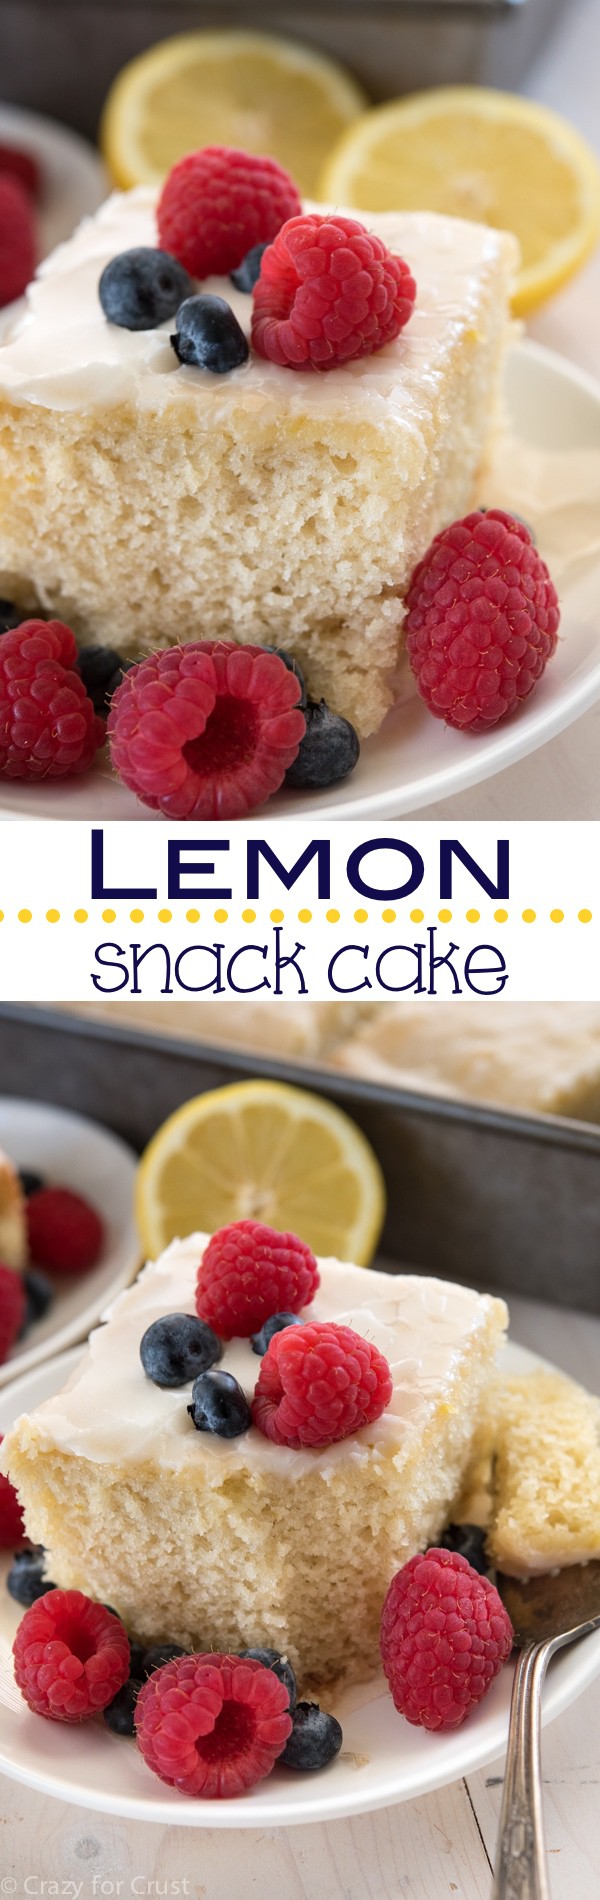 Lemon Snack Cake - an easy and fast lemon cake made with a lemon glaze! Perfect for a potluck or parties or as a simple dessert!